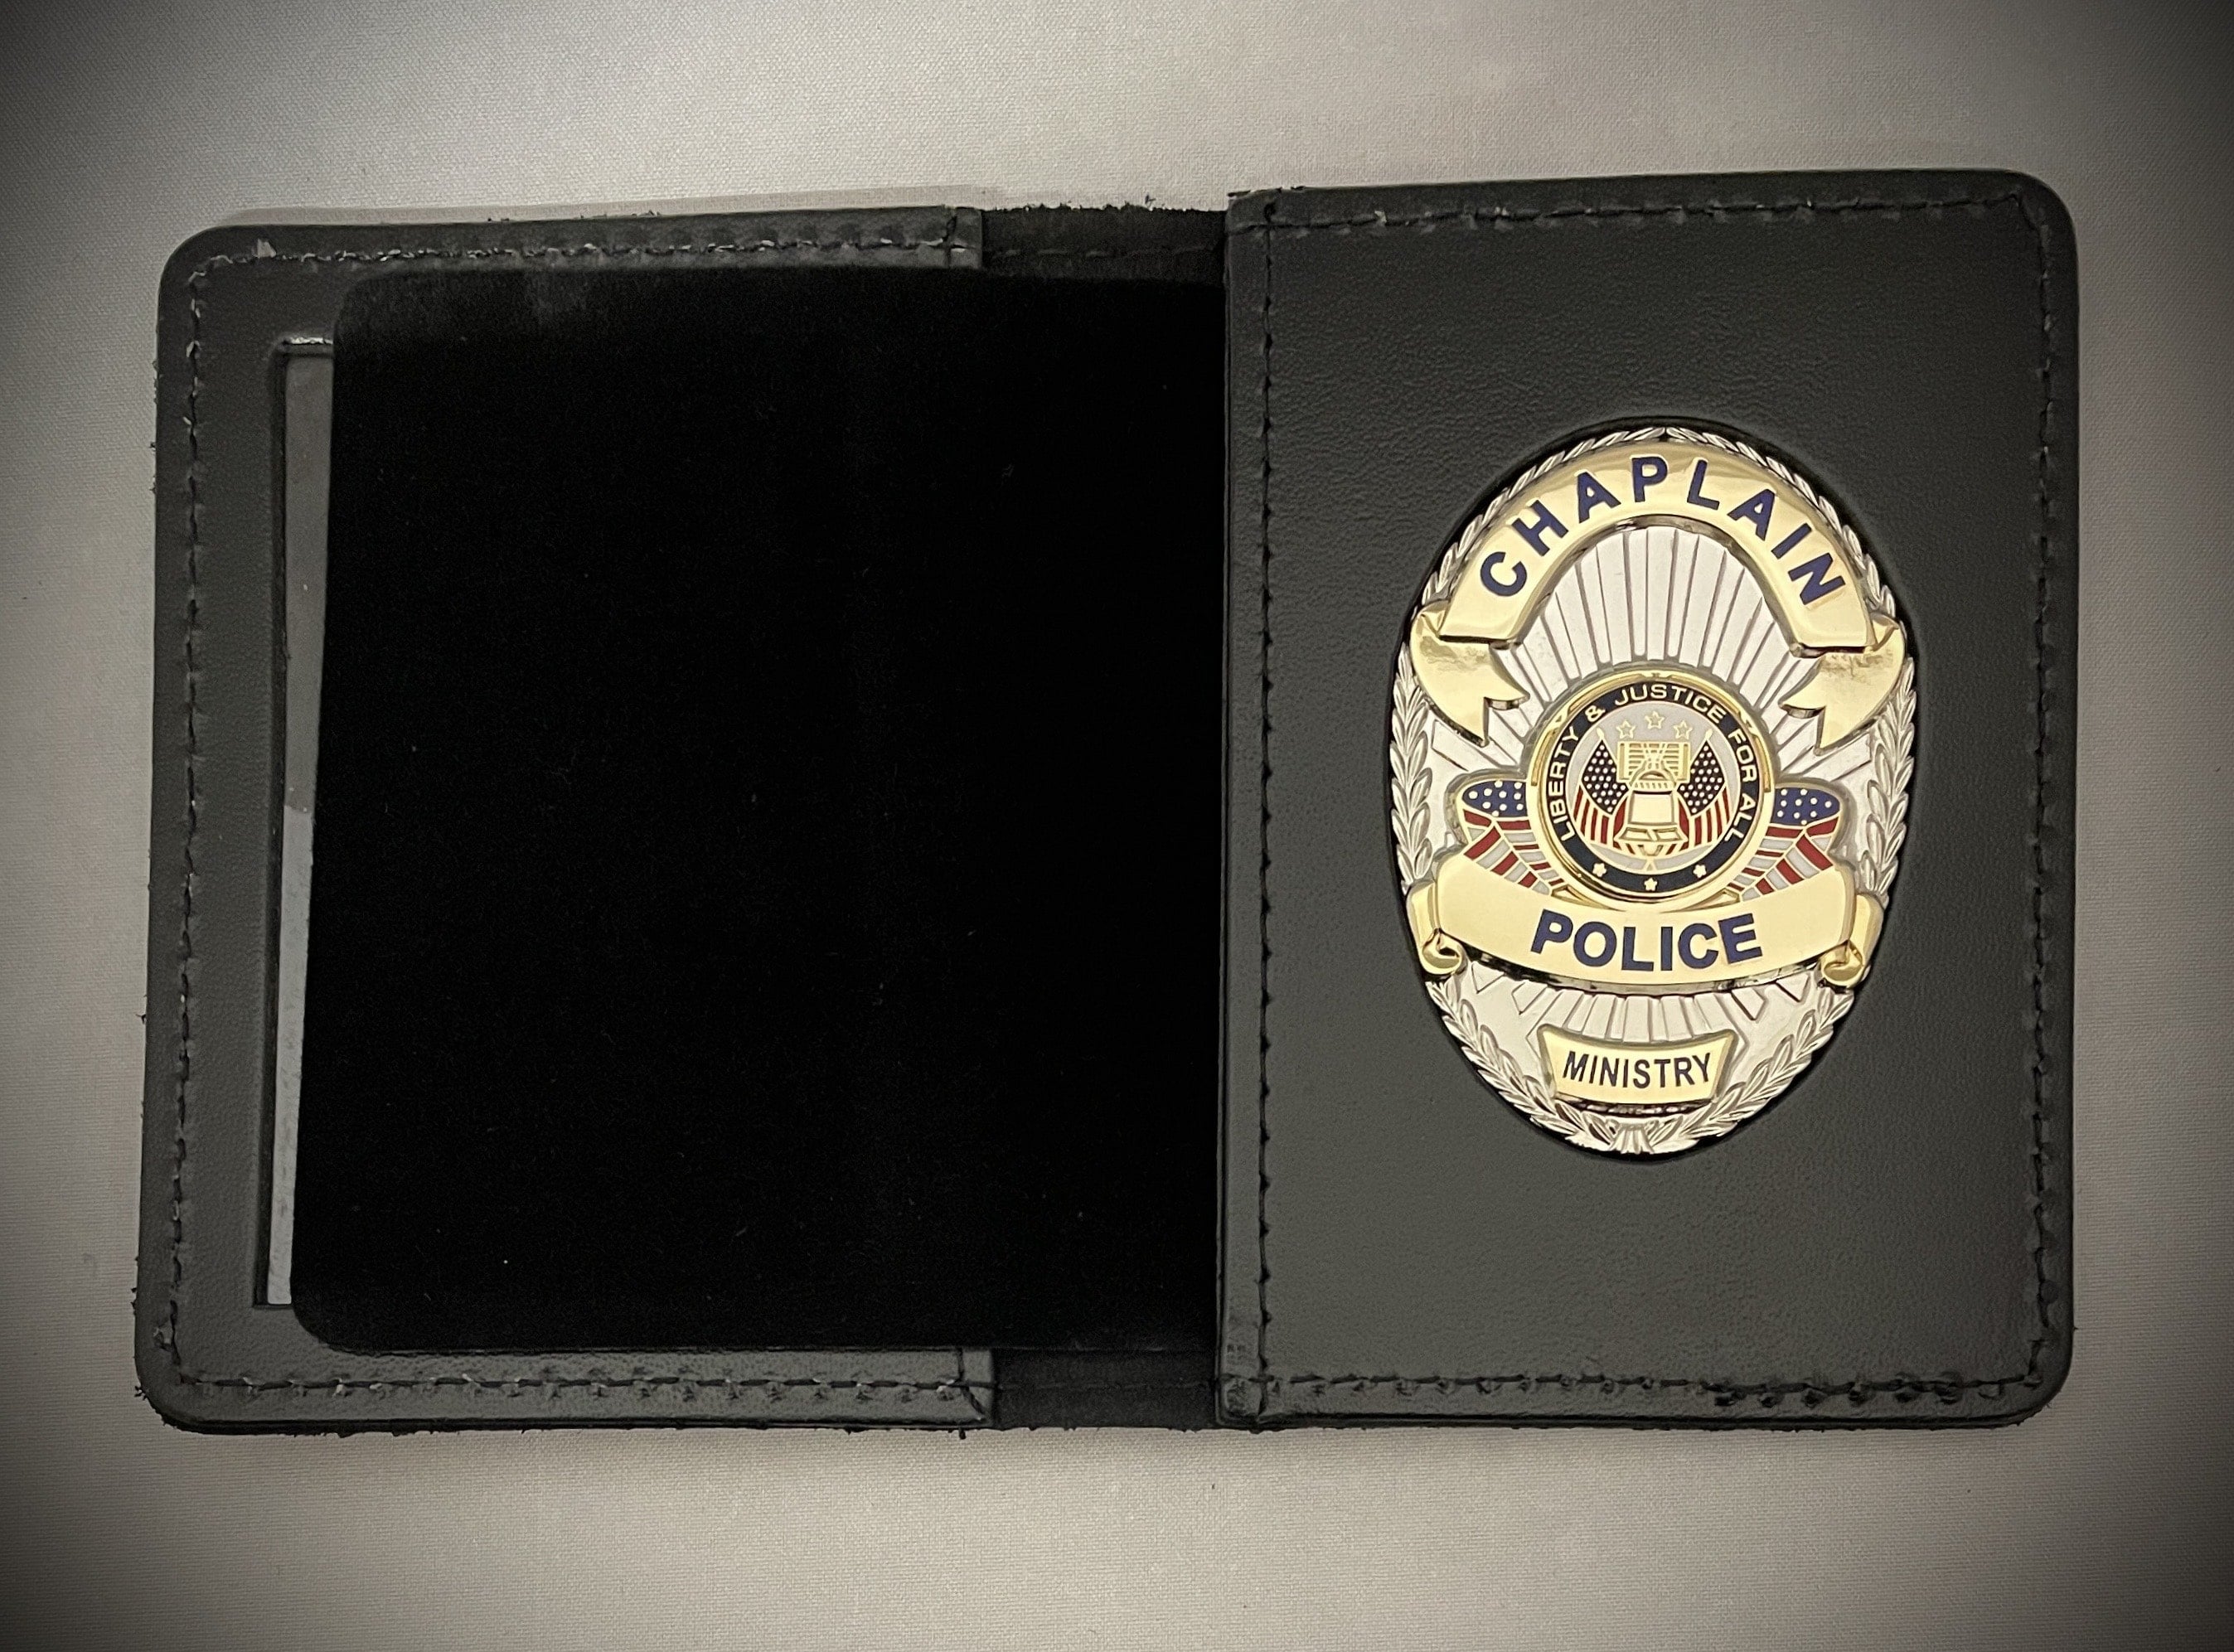 Chaplain Police Badge and Leather ID Holder - Chaplain Badge